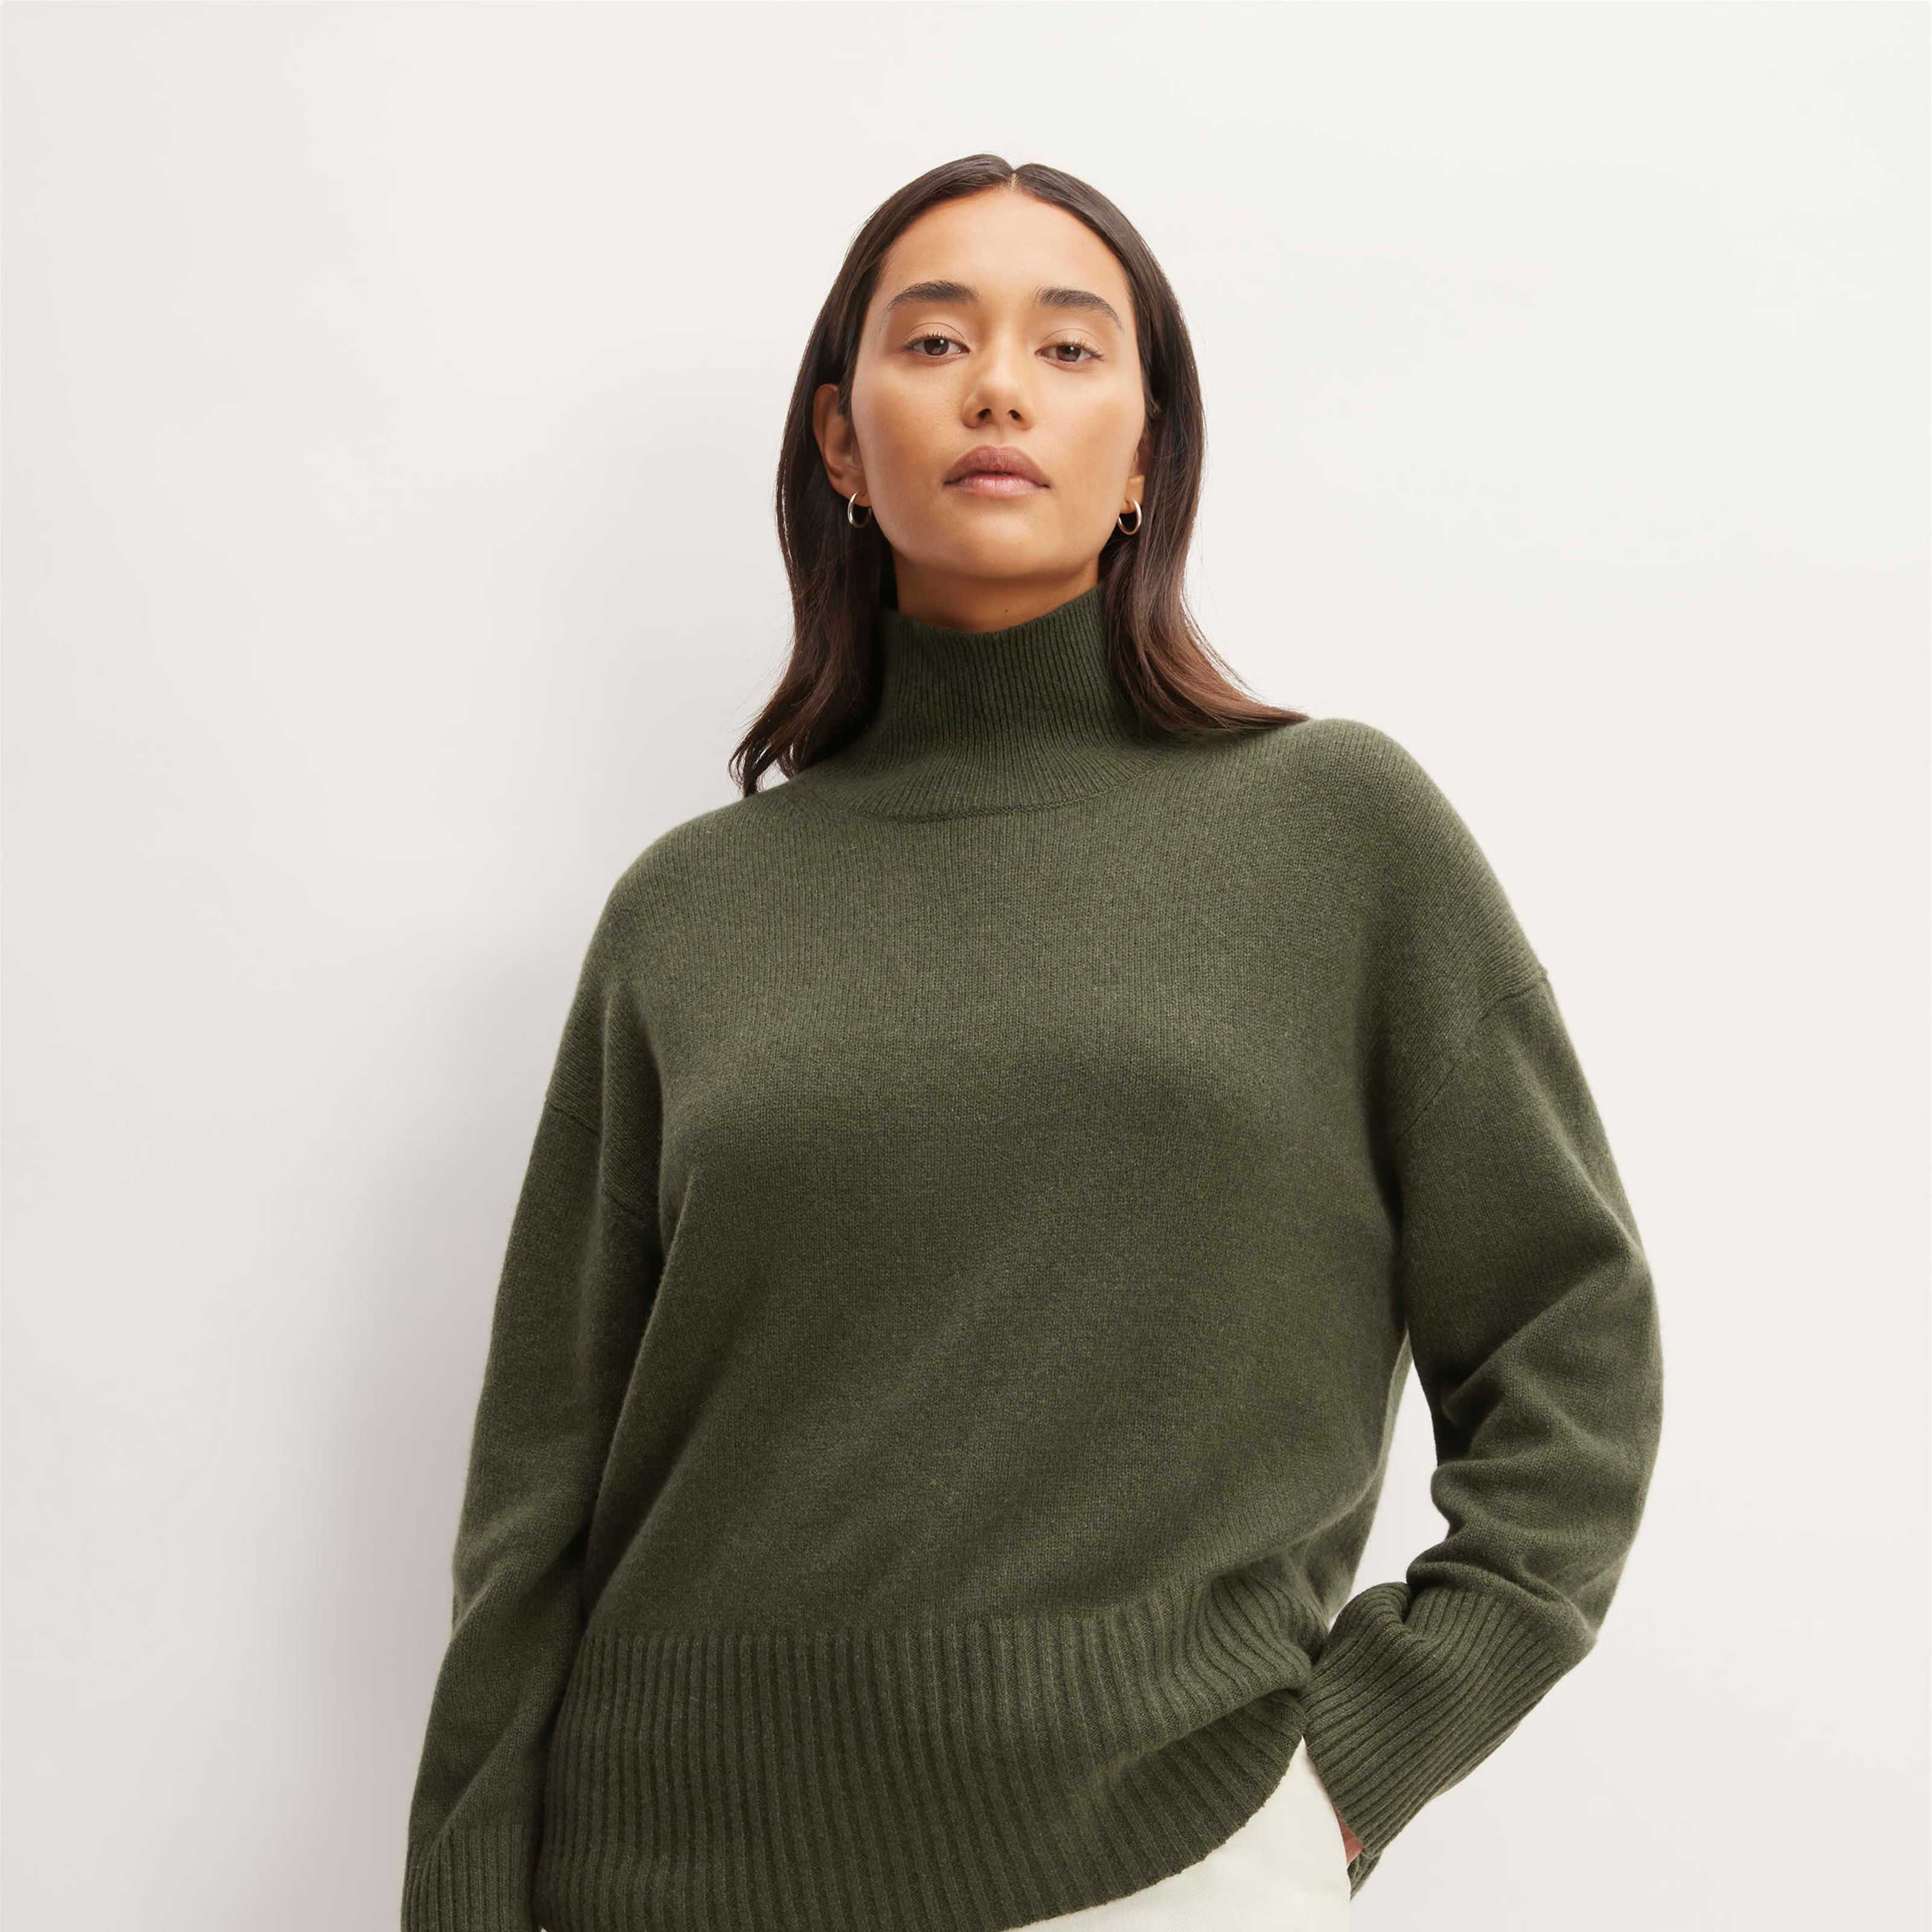 Women's Cashmere Oversized Turtleneck Sweater by Everlane in Olive, Size M